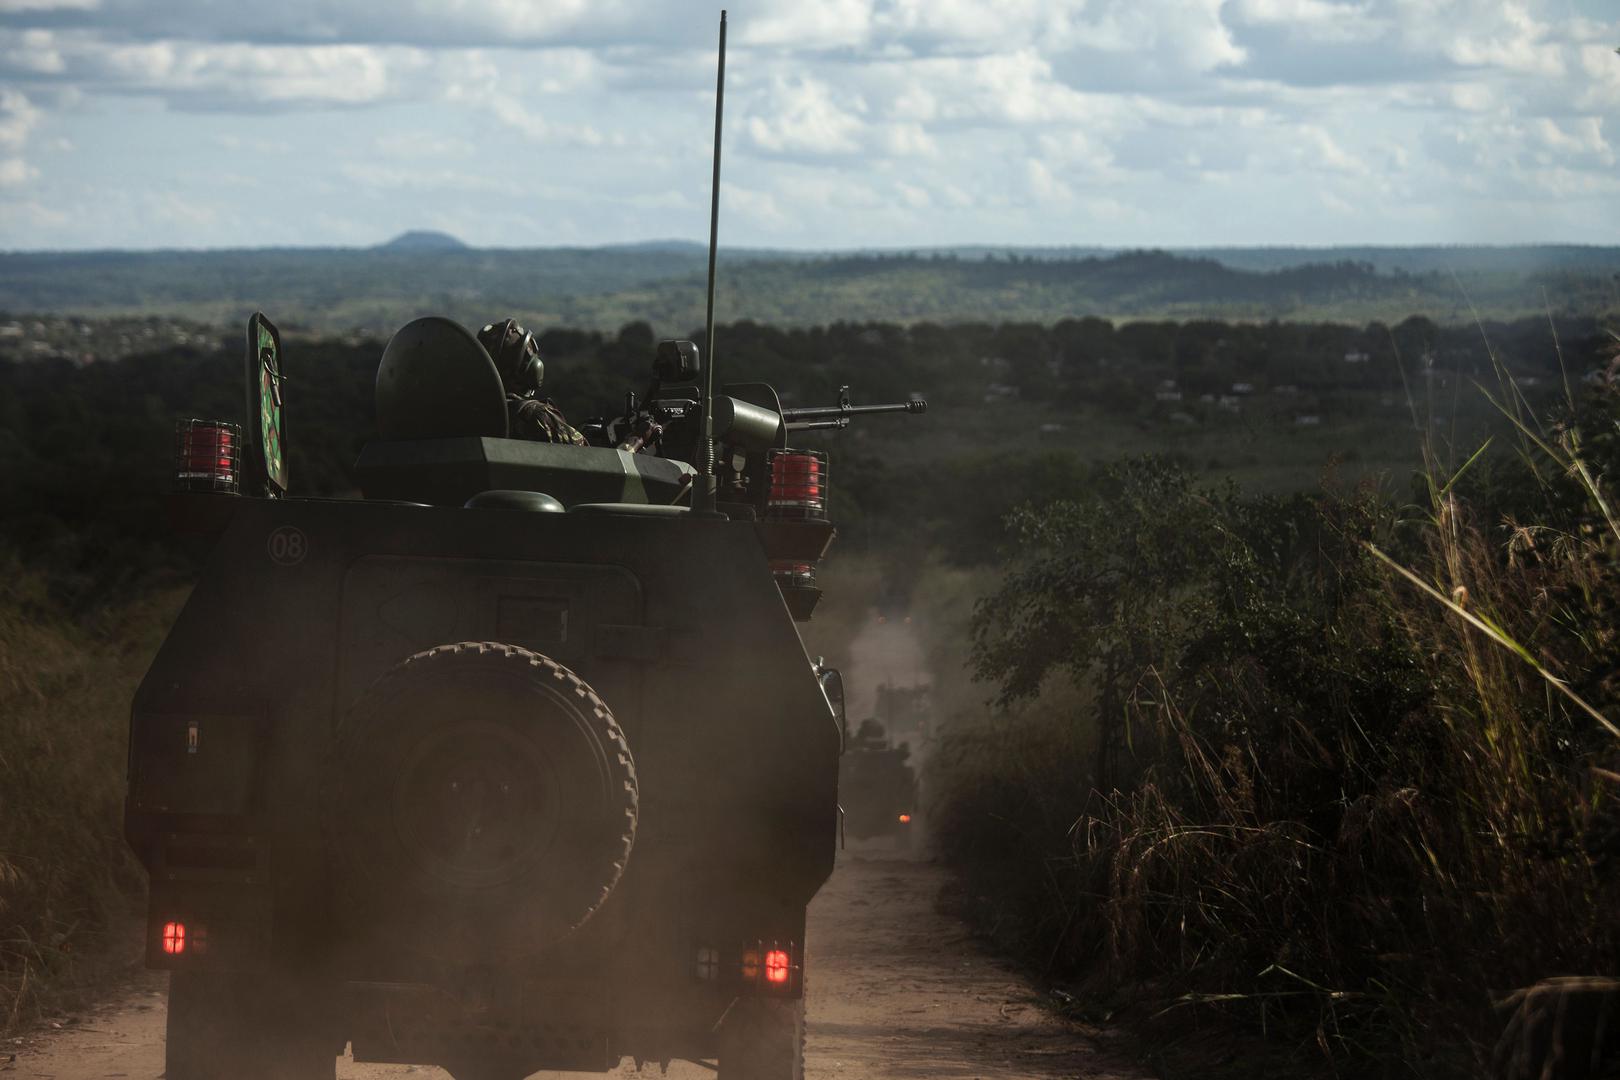 Mozambican army vehicles patrol roads in the Gorongosa area in central Mozambique, May 2016.